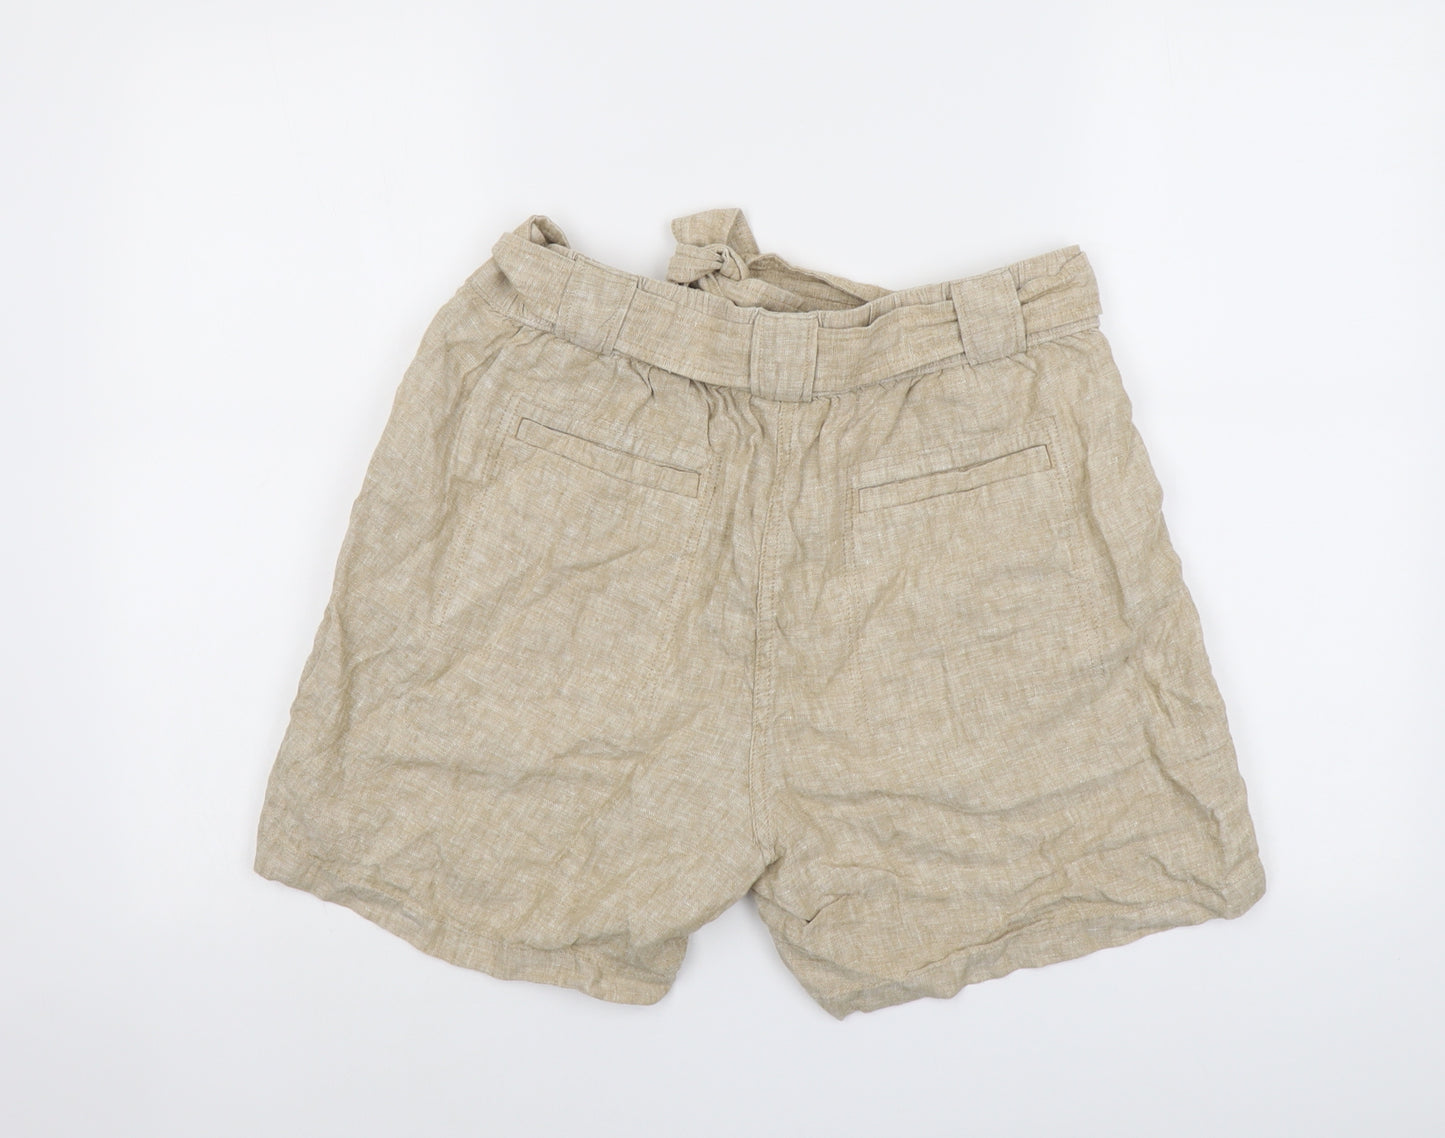 Marks and Spencer Womens Beige Linen Basic Shorts Size 14 L6 in Regular Button